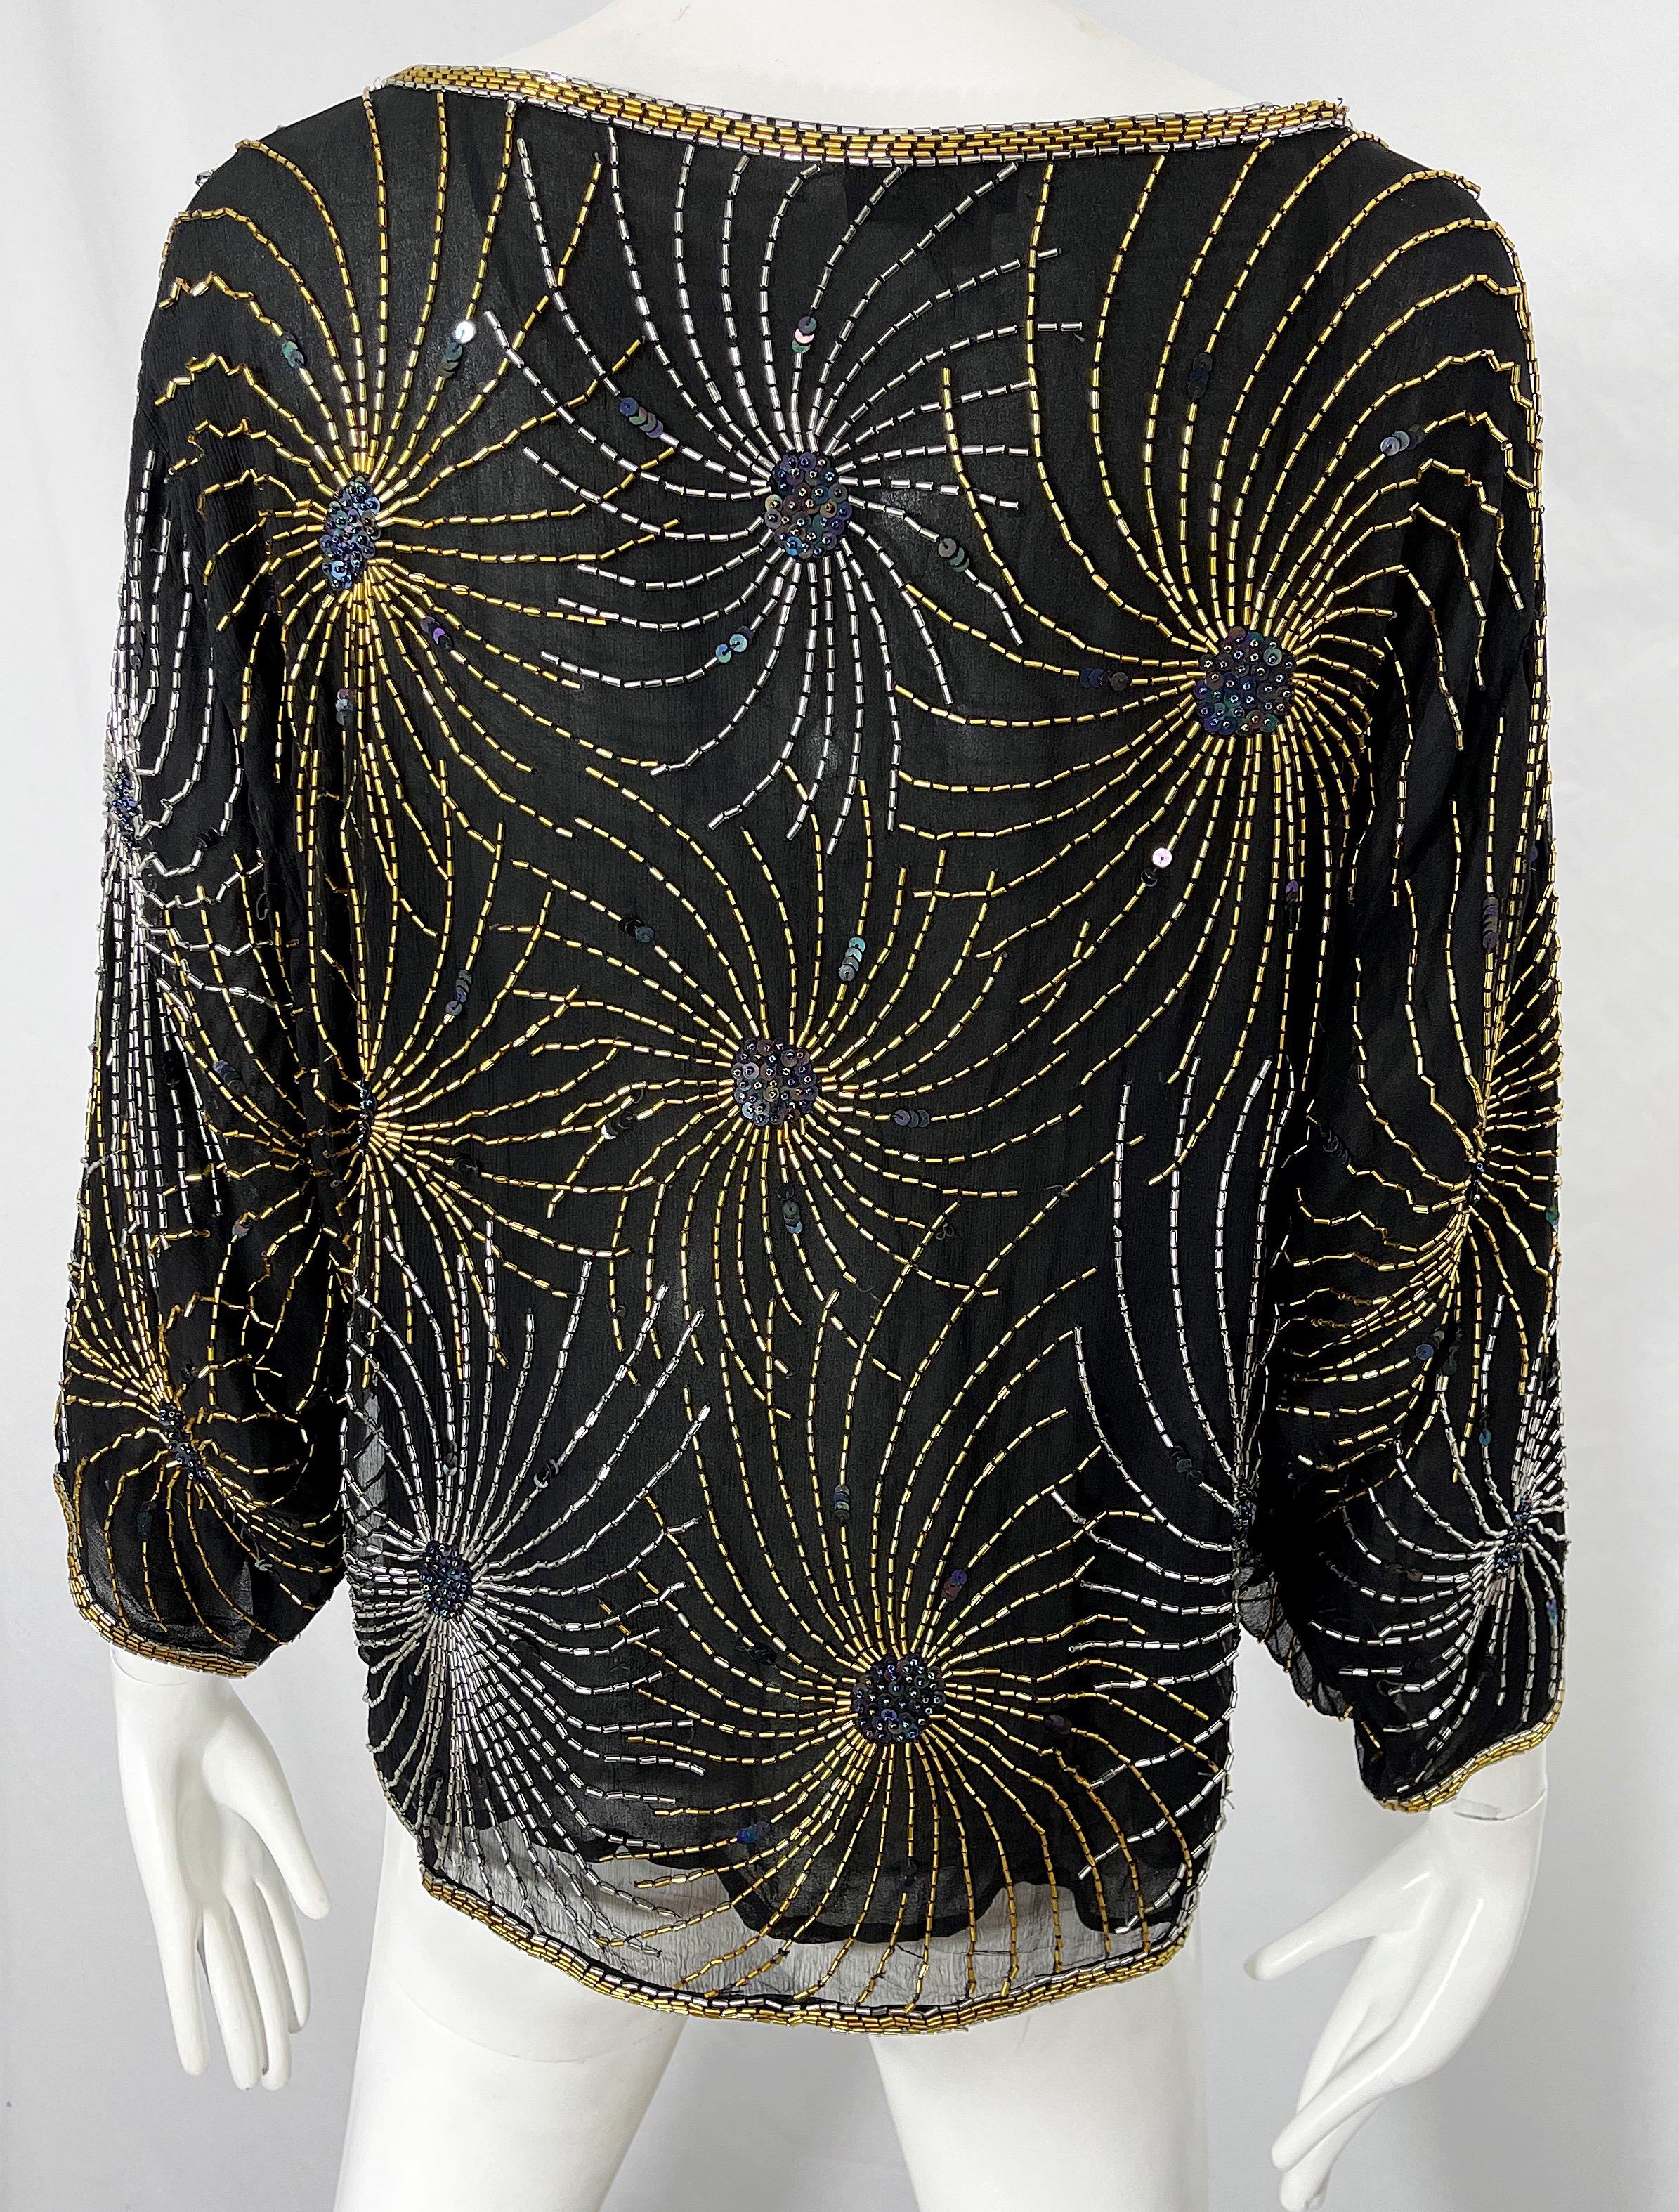 Halston 1970s Iconic Fireworks Beaded Black Silk Chiffon Vintage 70s Blouse Top For Sale 4